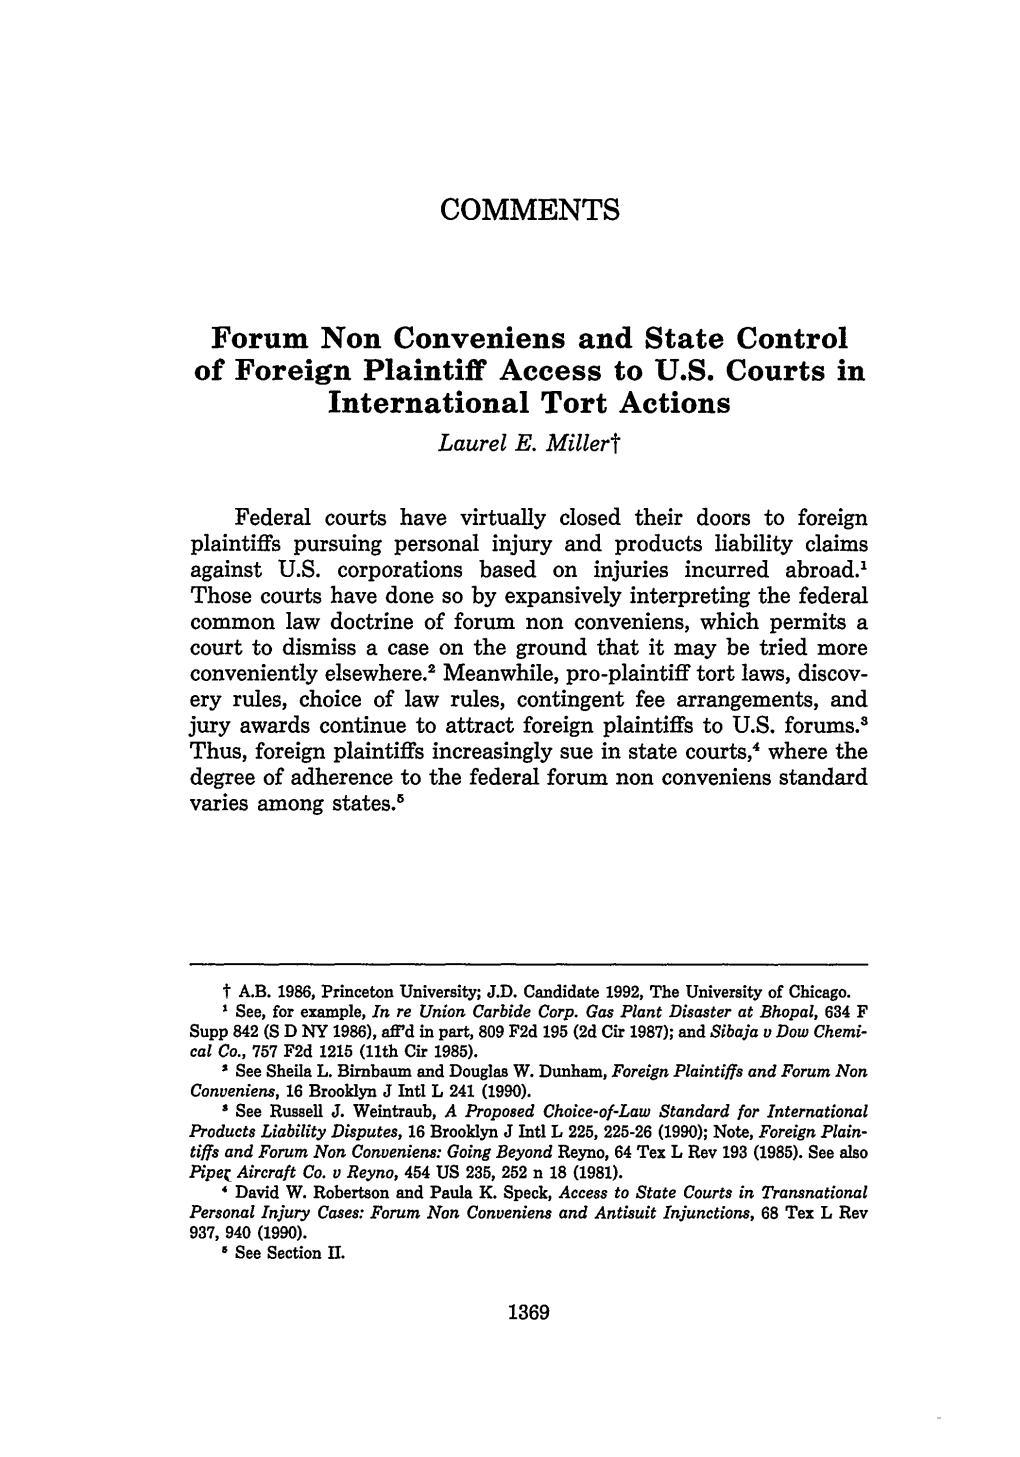 Forum Non Conveniens and State Control of Foreign Plaintiff Access to U.S